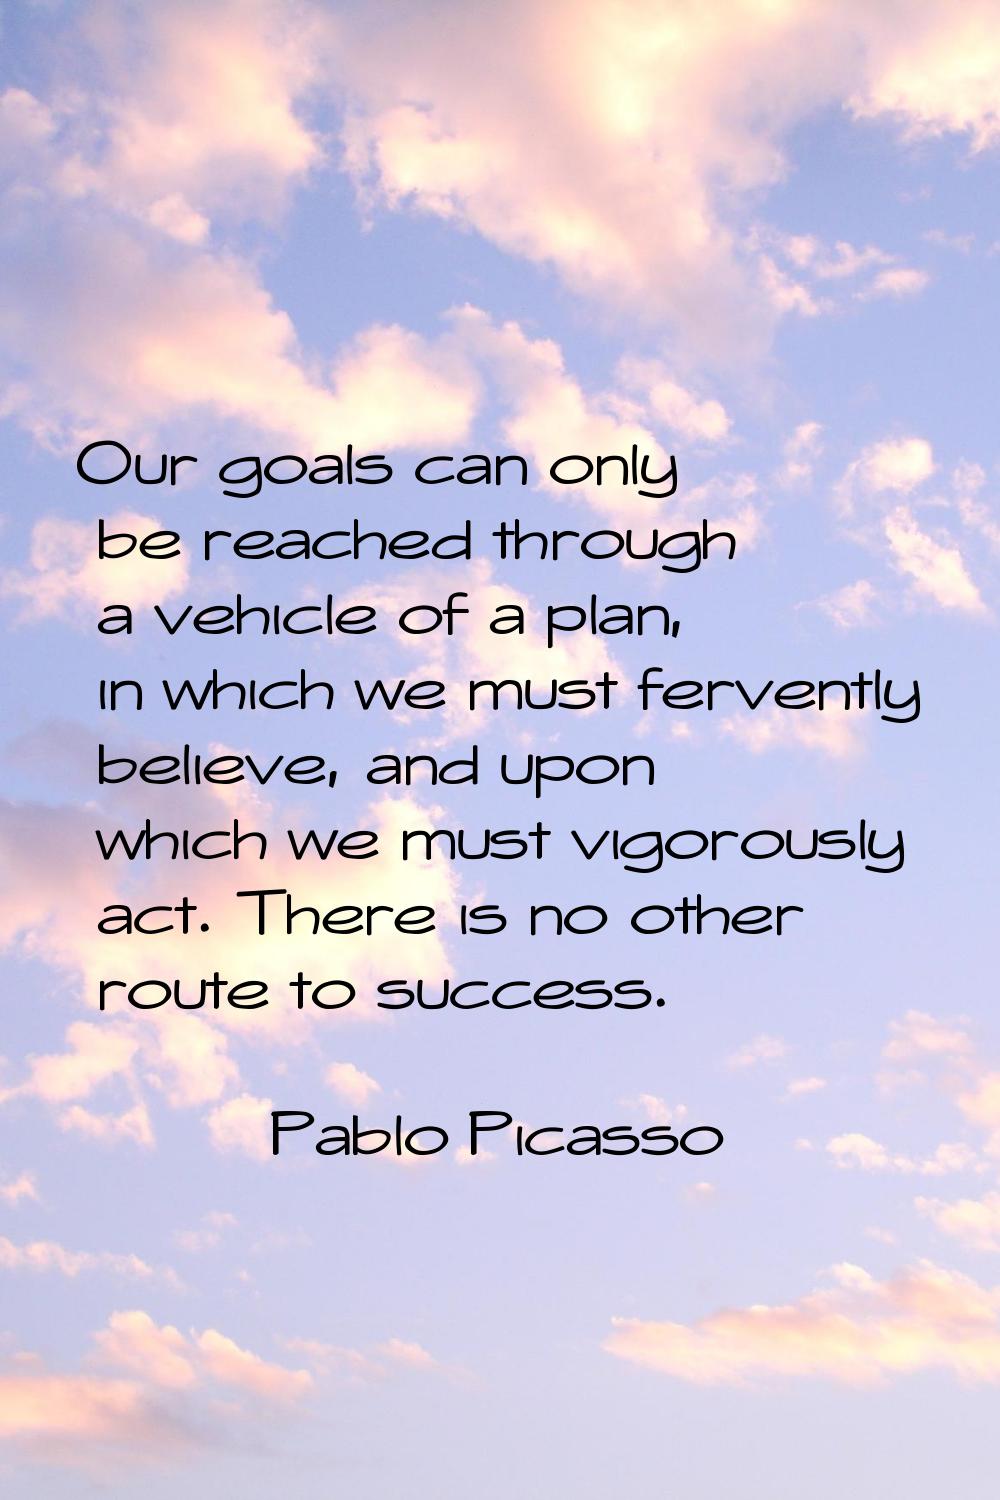 Our goals can only be reached through a vehicle of a plan, in which we must fervently believe, and 